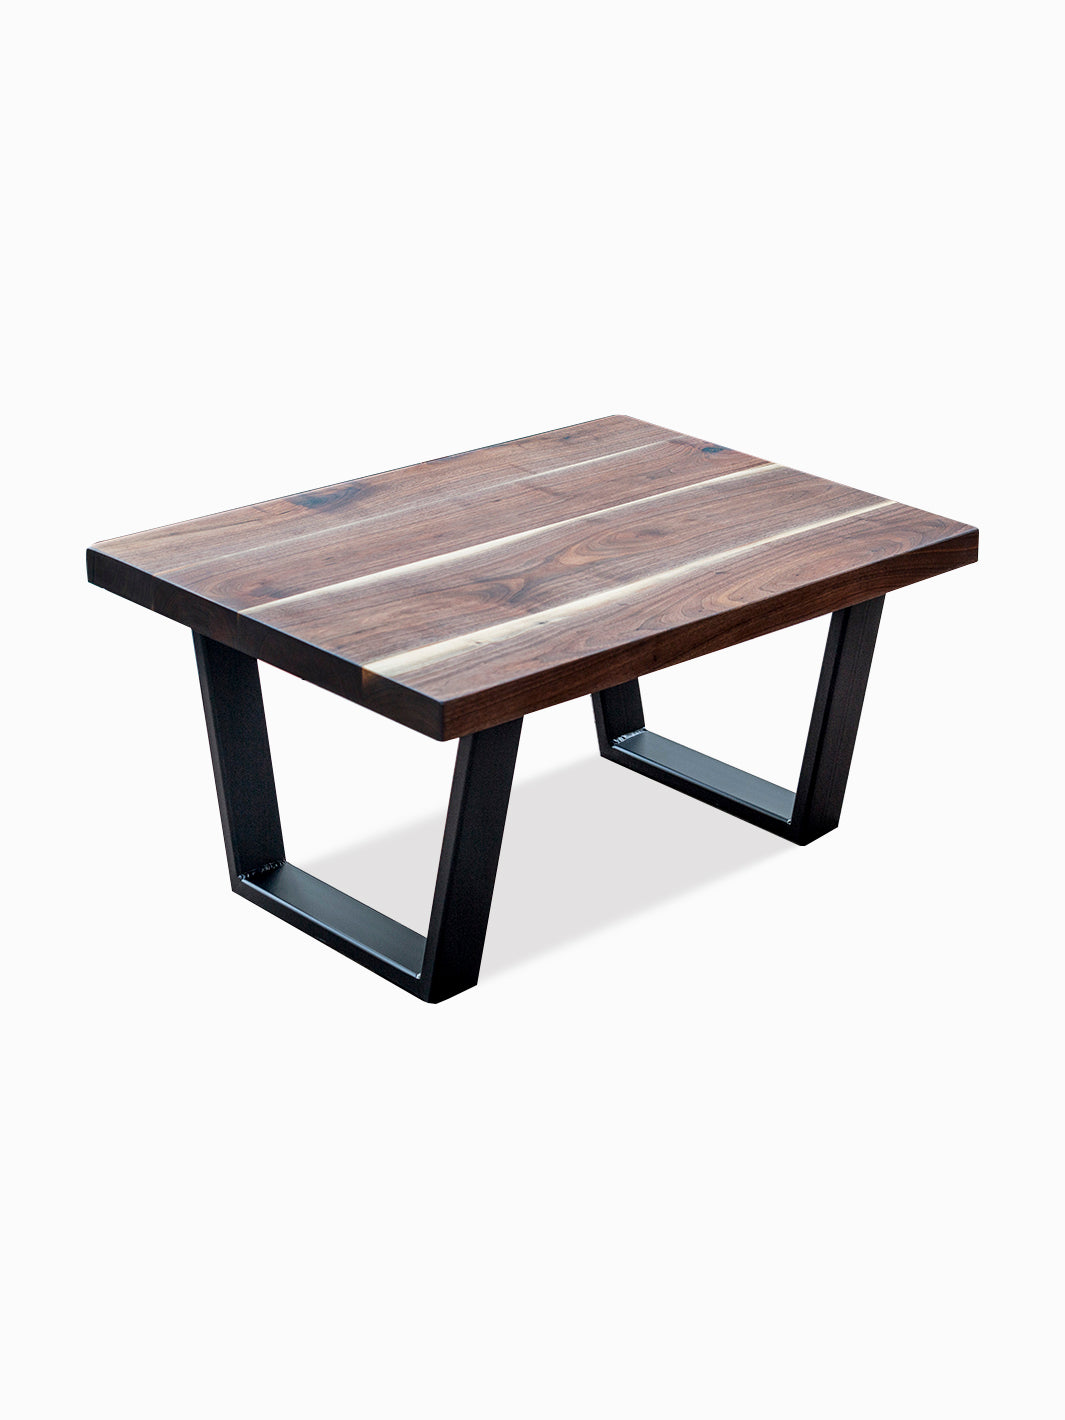 Modern Walnut and Steel Coffee Table Earthly Comfort Coffee Tables 671